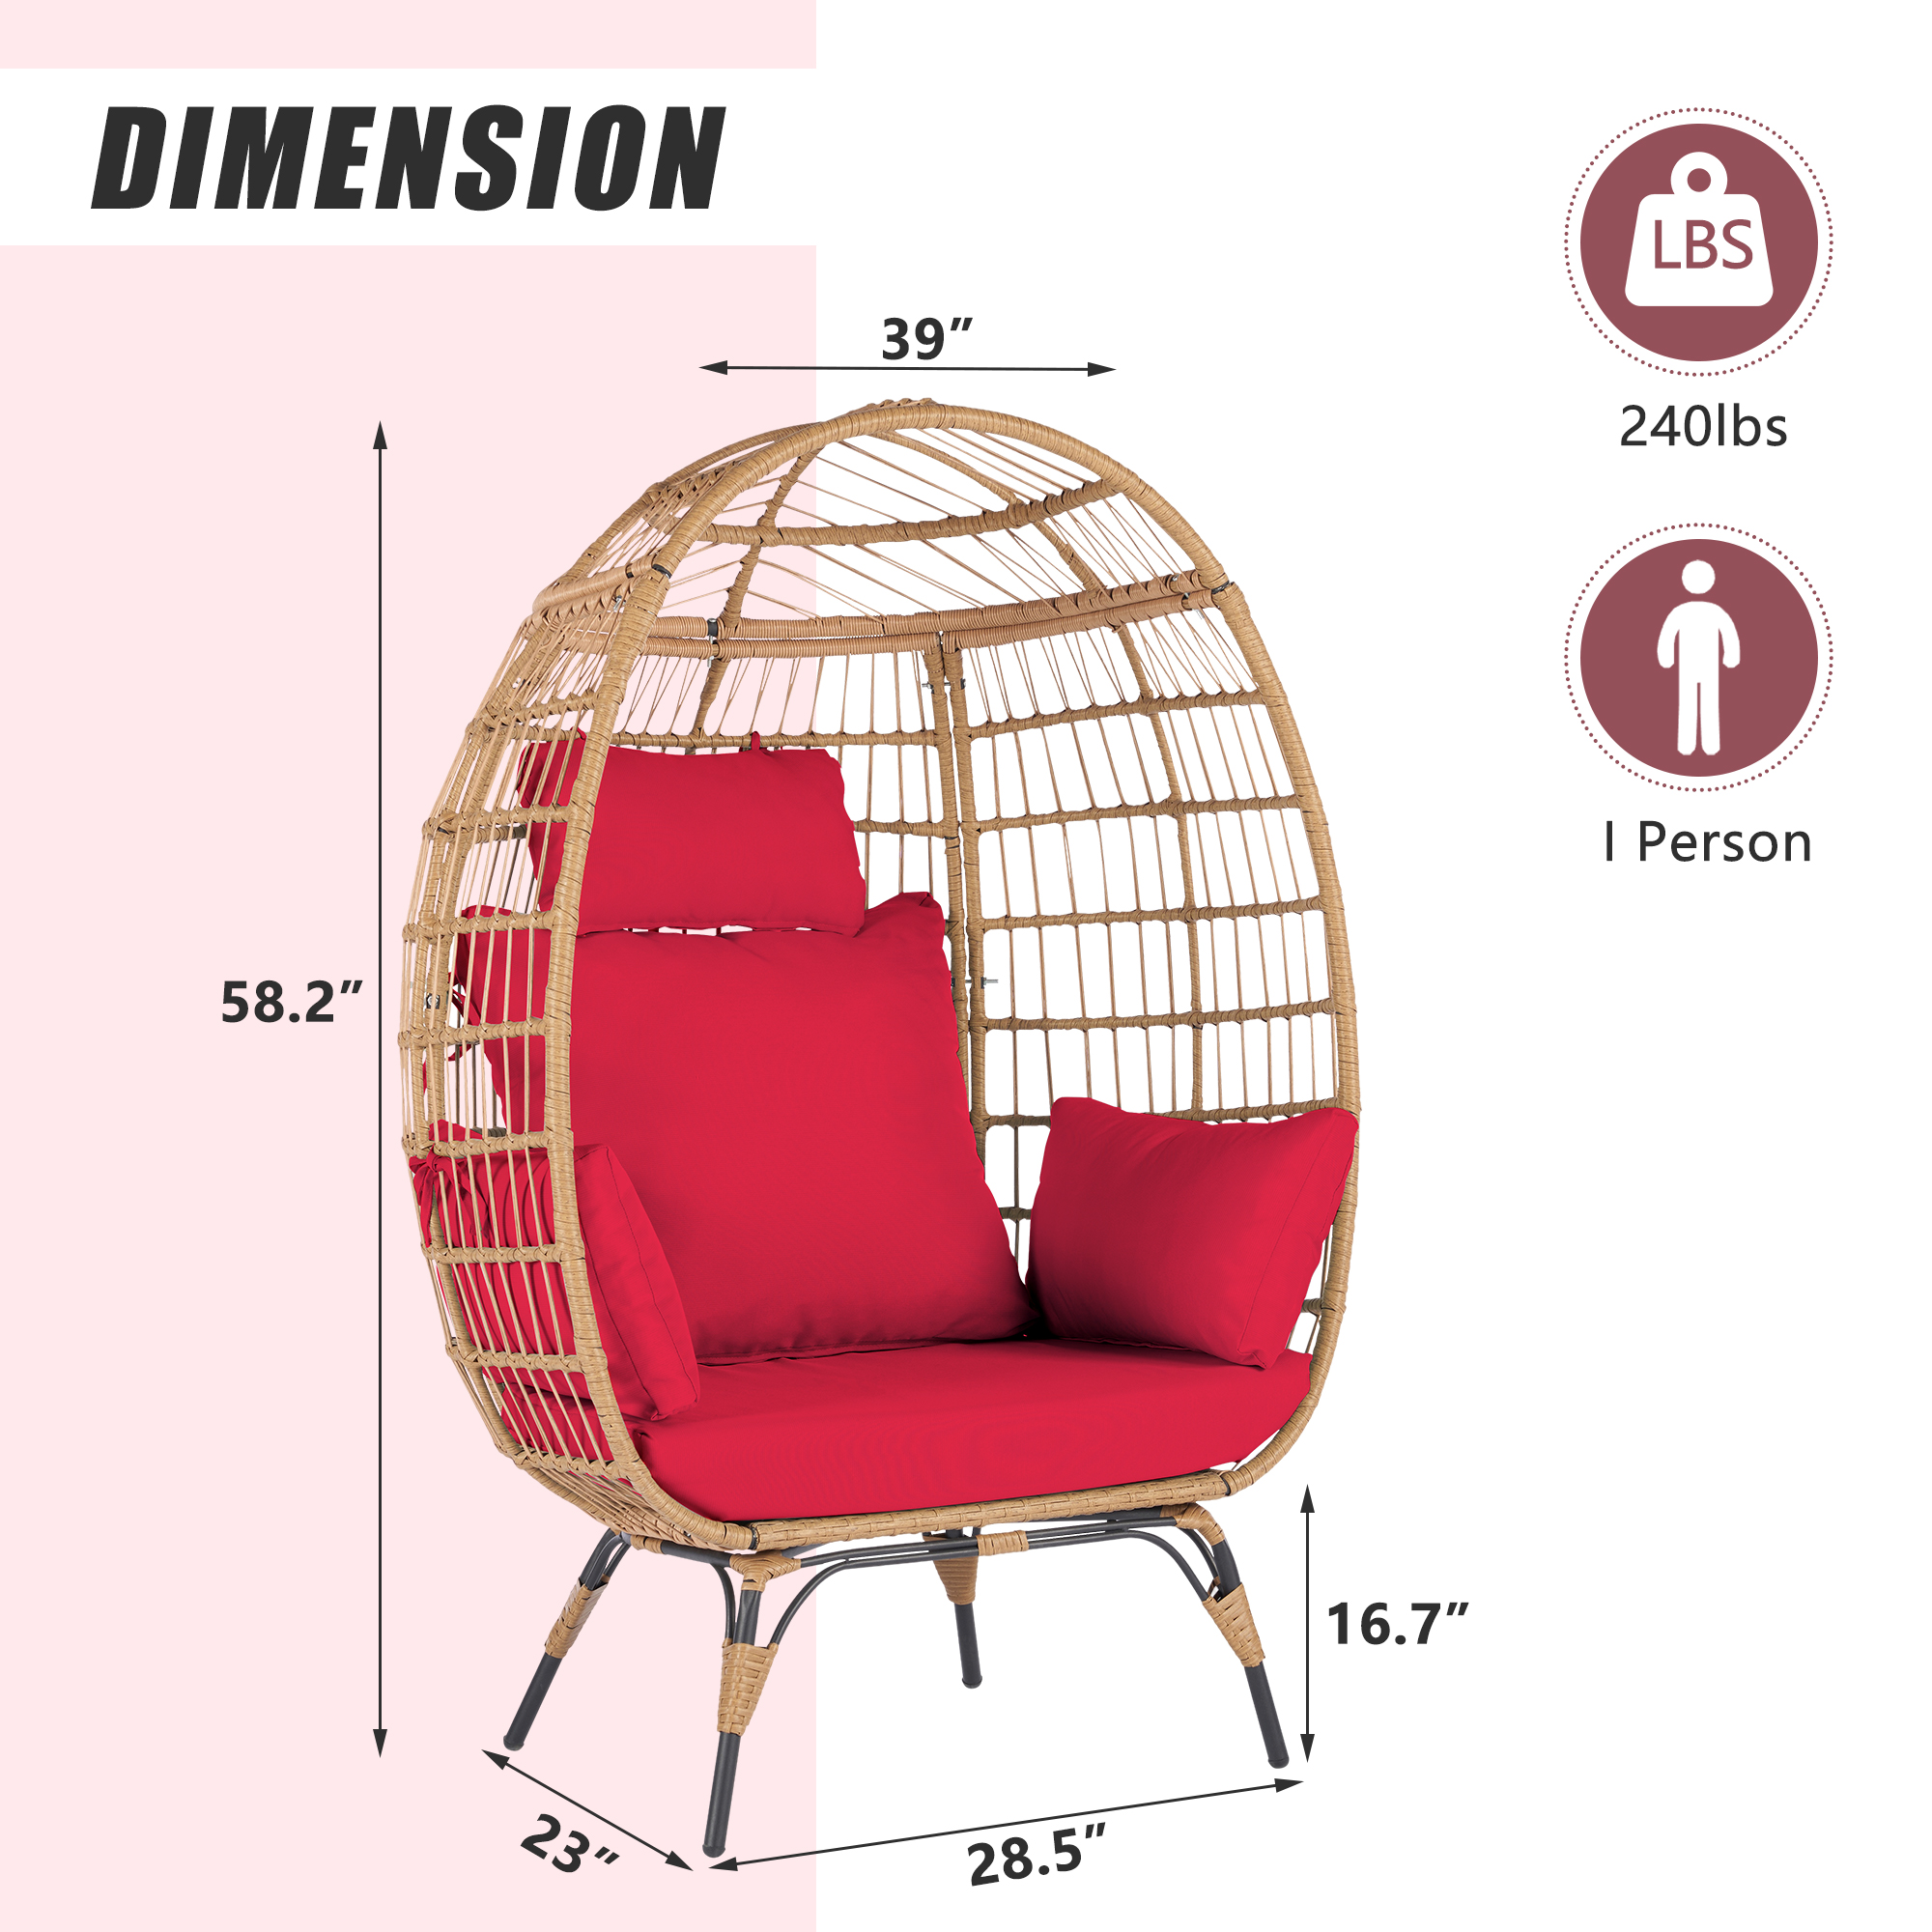 Outdoor Stationary Egg Chair, Wicker Egg Swing Chair with Red Cushions for Patio, Garden, Backyard, Rattan Standing Egg Chair - image 3 of 10